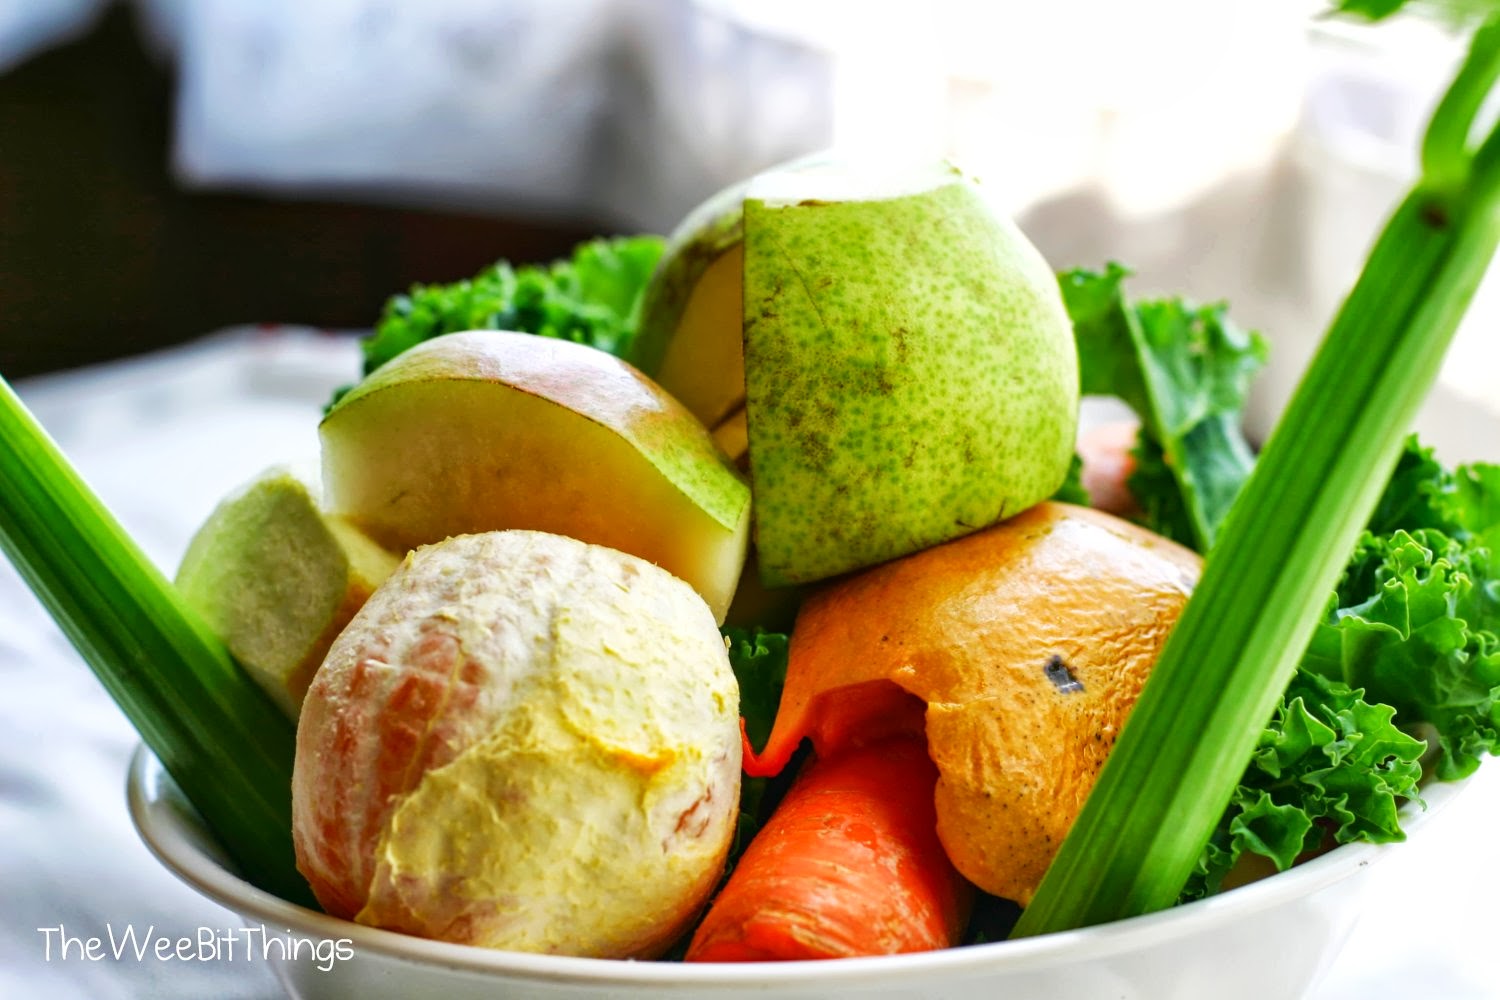 Image of Fresh Fruit and Vegetable Bowl